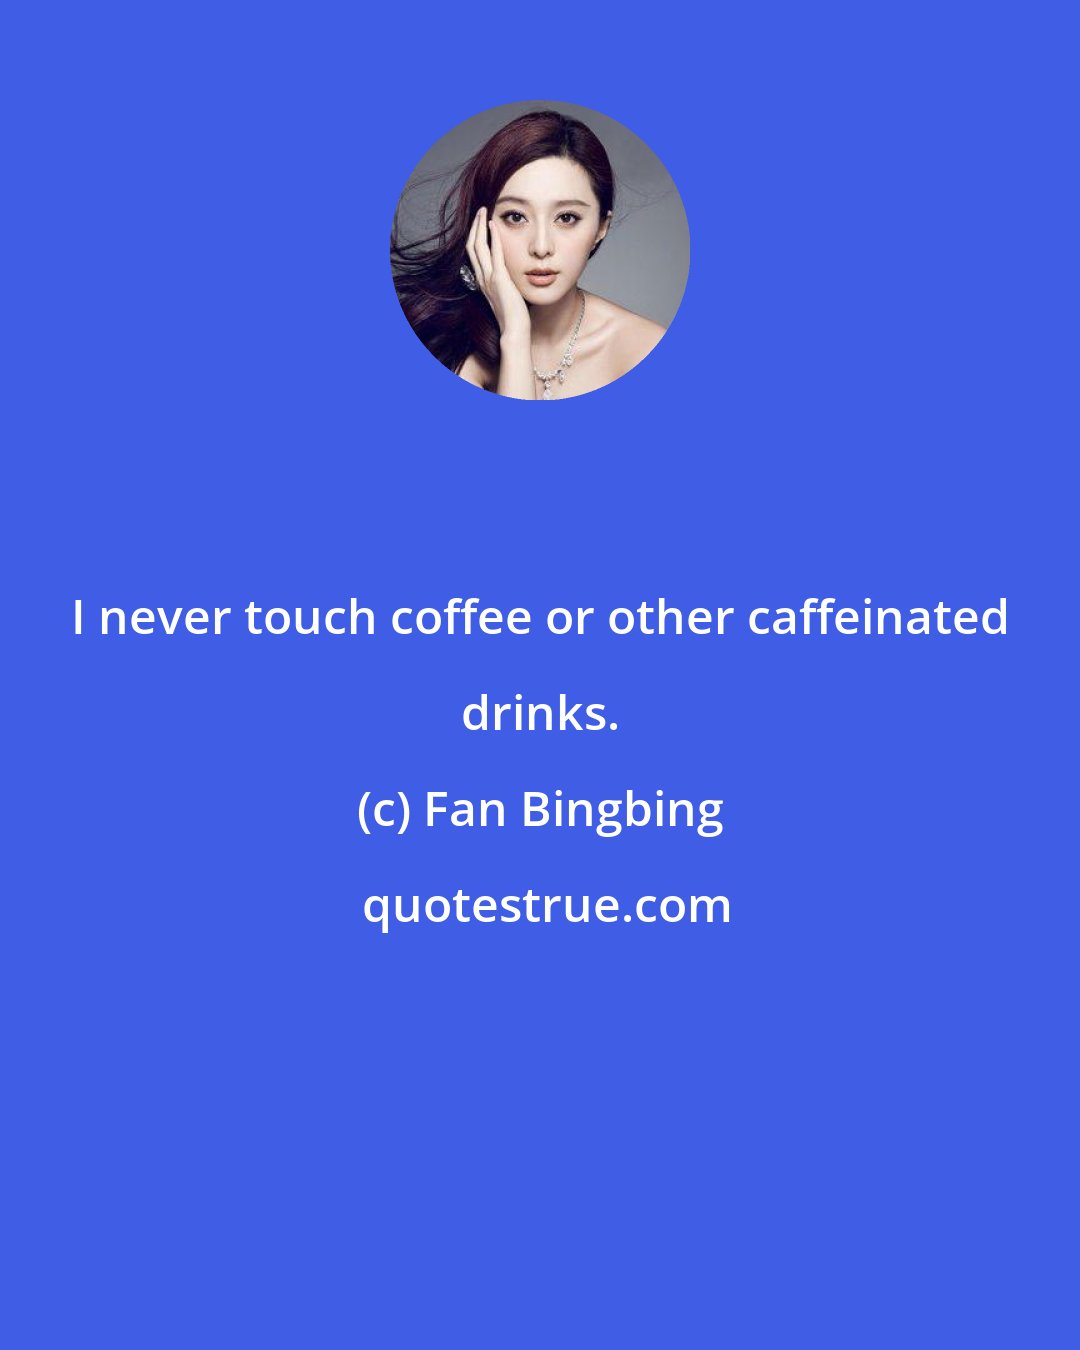 Fan Bingbing: I never touch coffee or other caffeinated drinks.